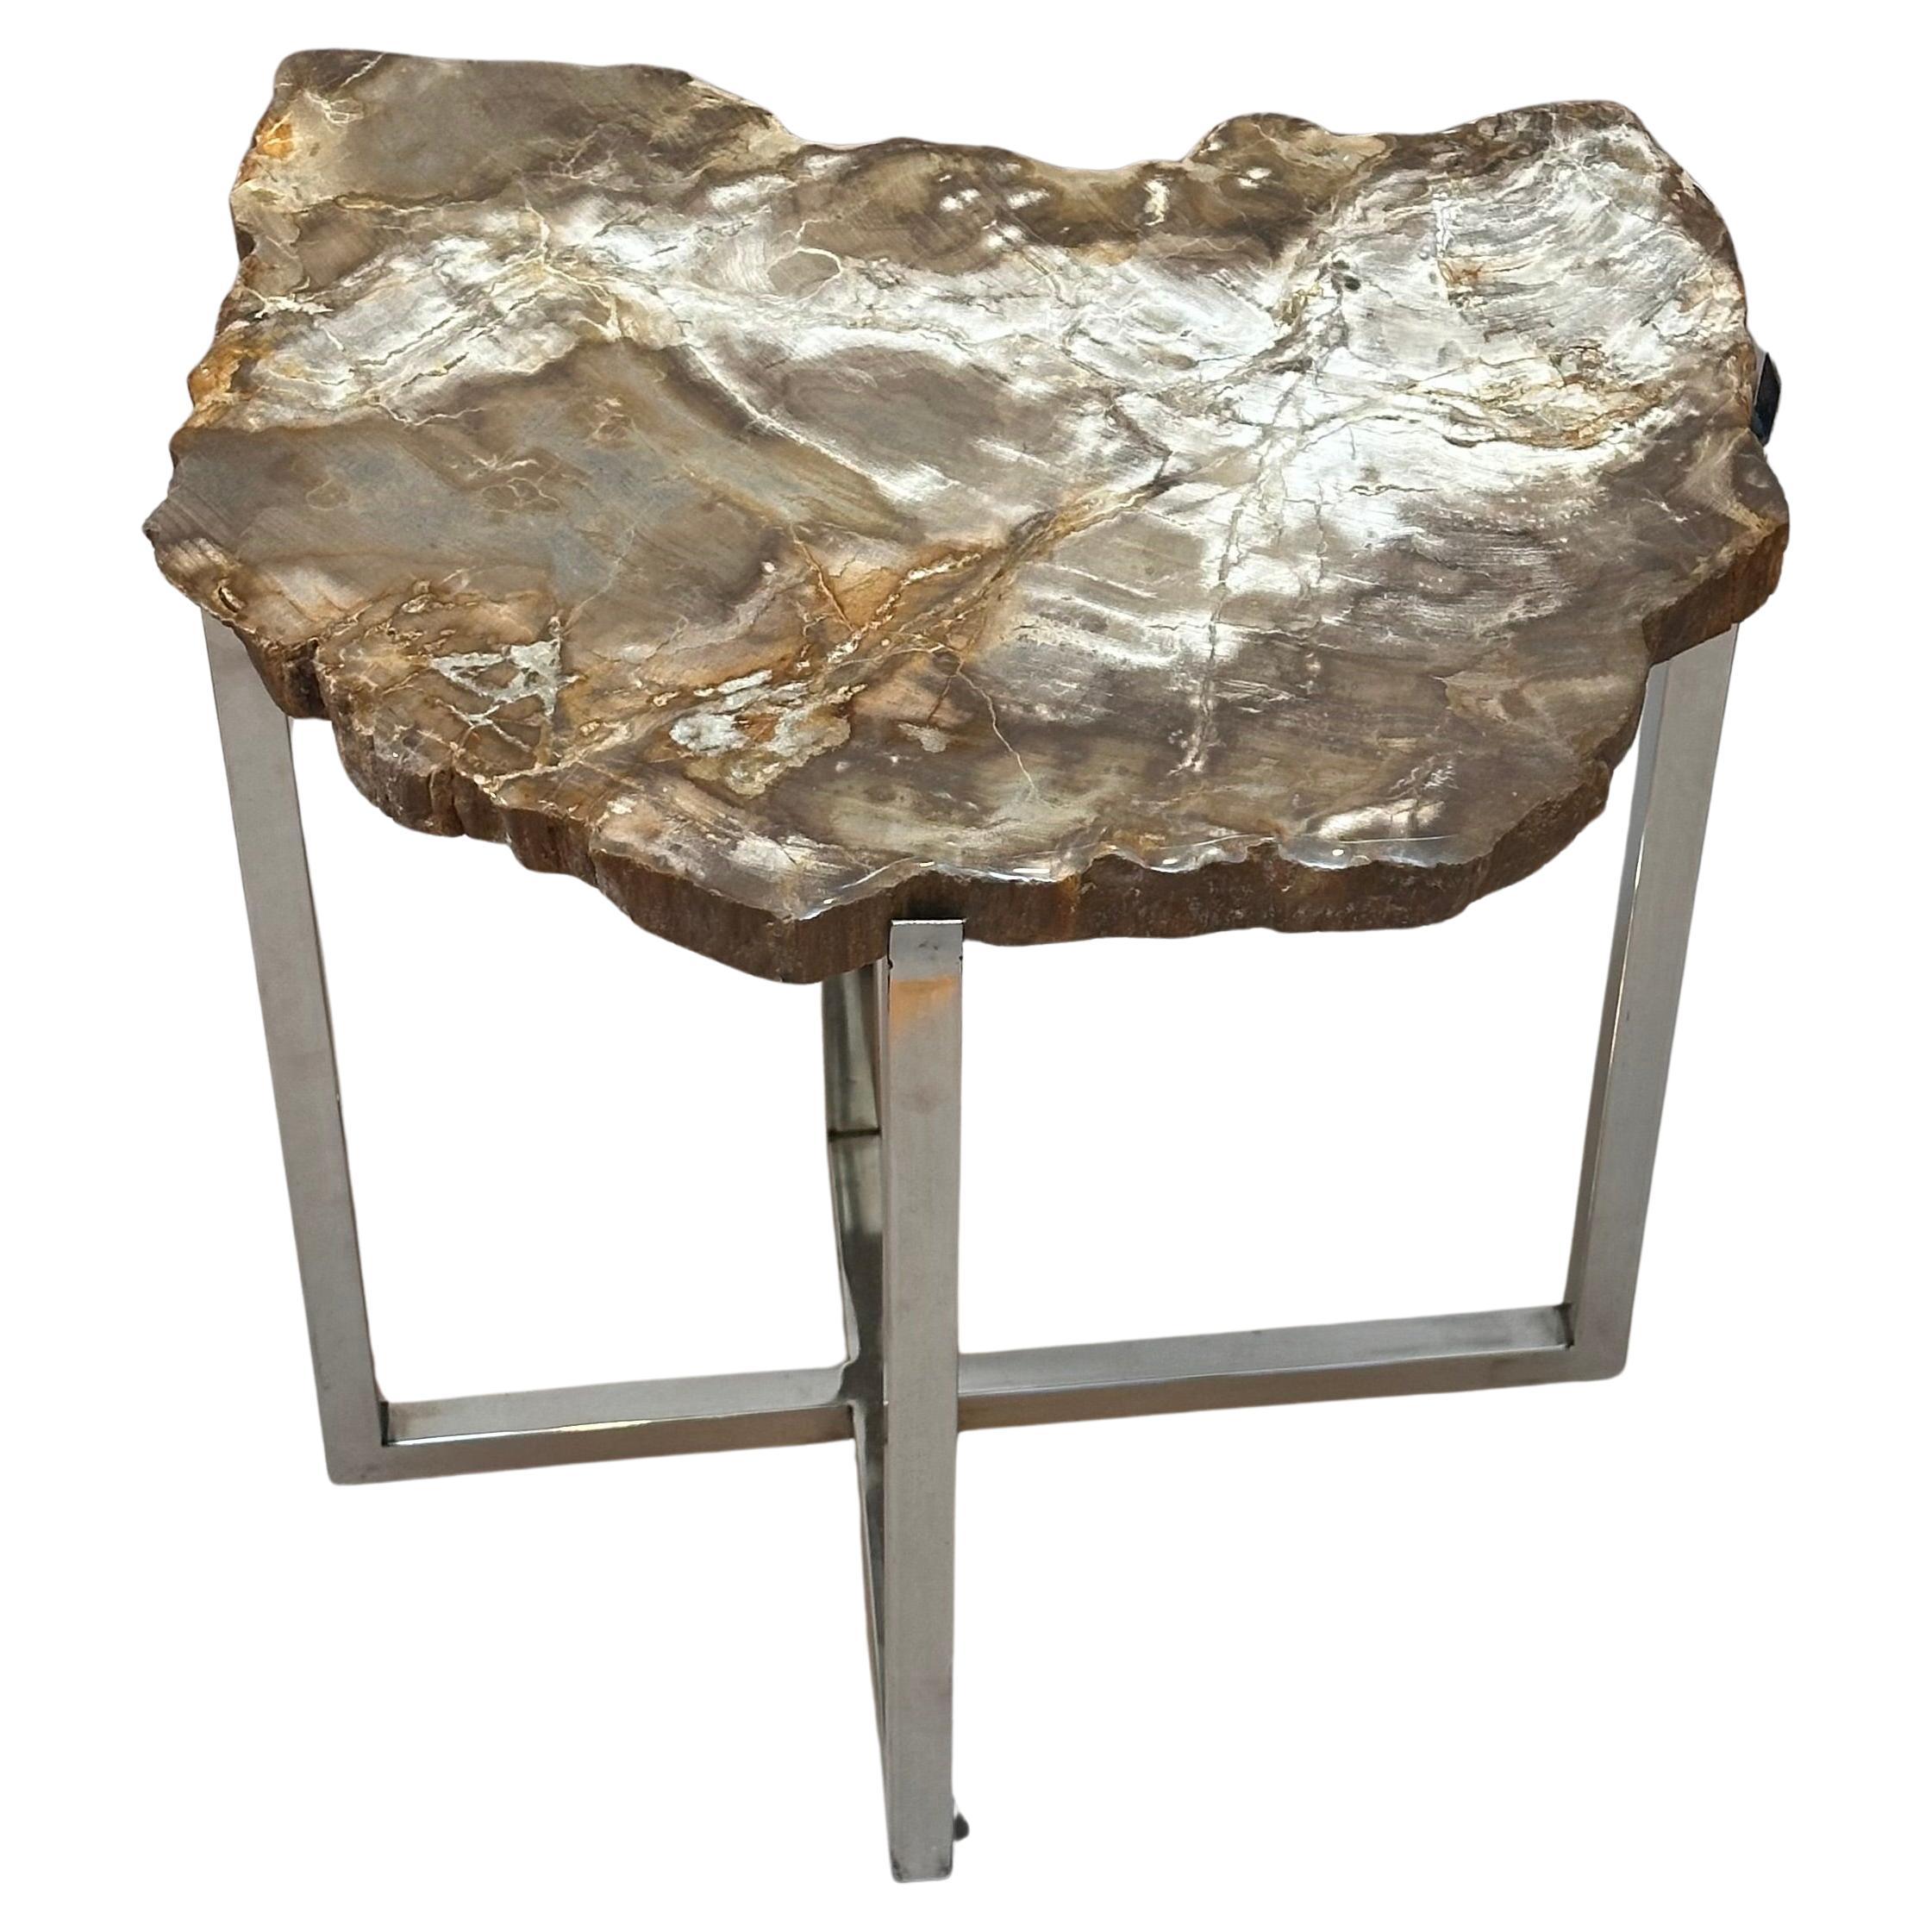 Unusual Modern Side Table with 200 Million Year Old Petrified Wood Top